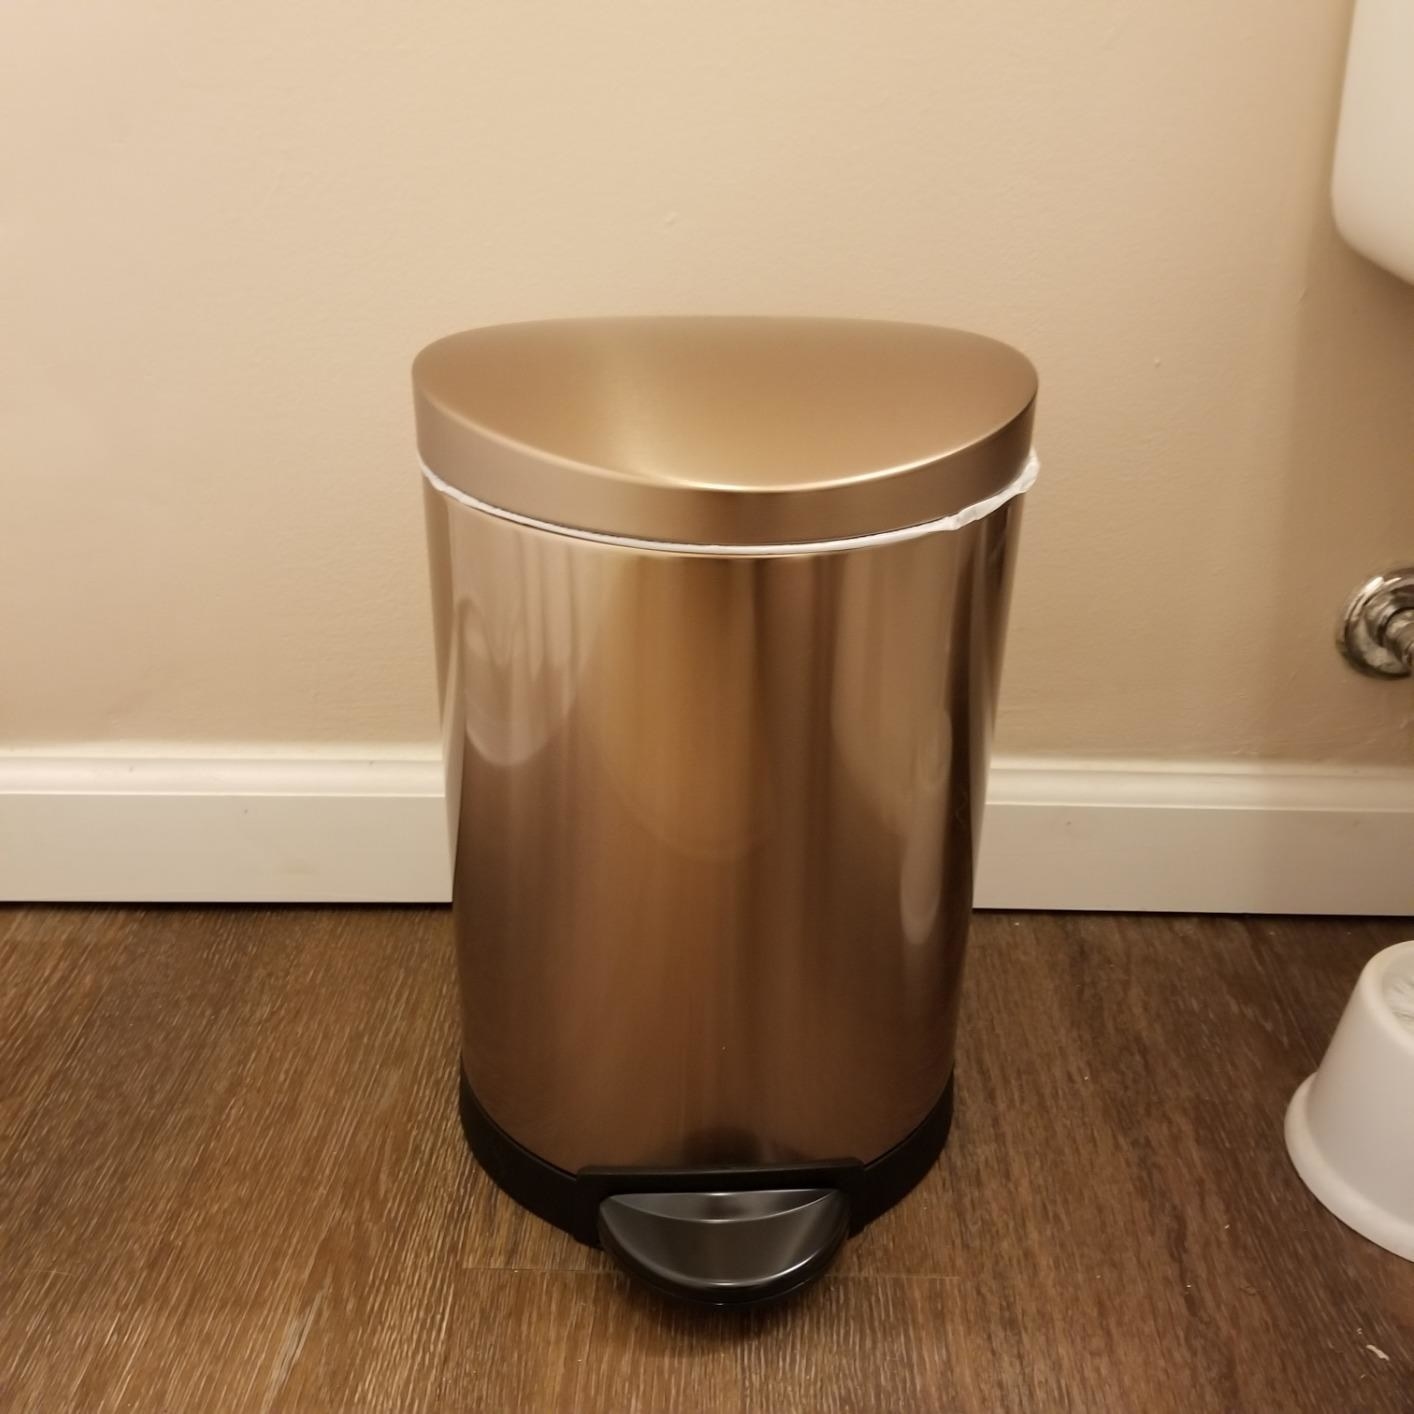 A reviewer photo of the rose gold trash can, which is cylindrical